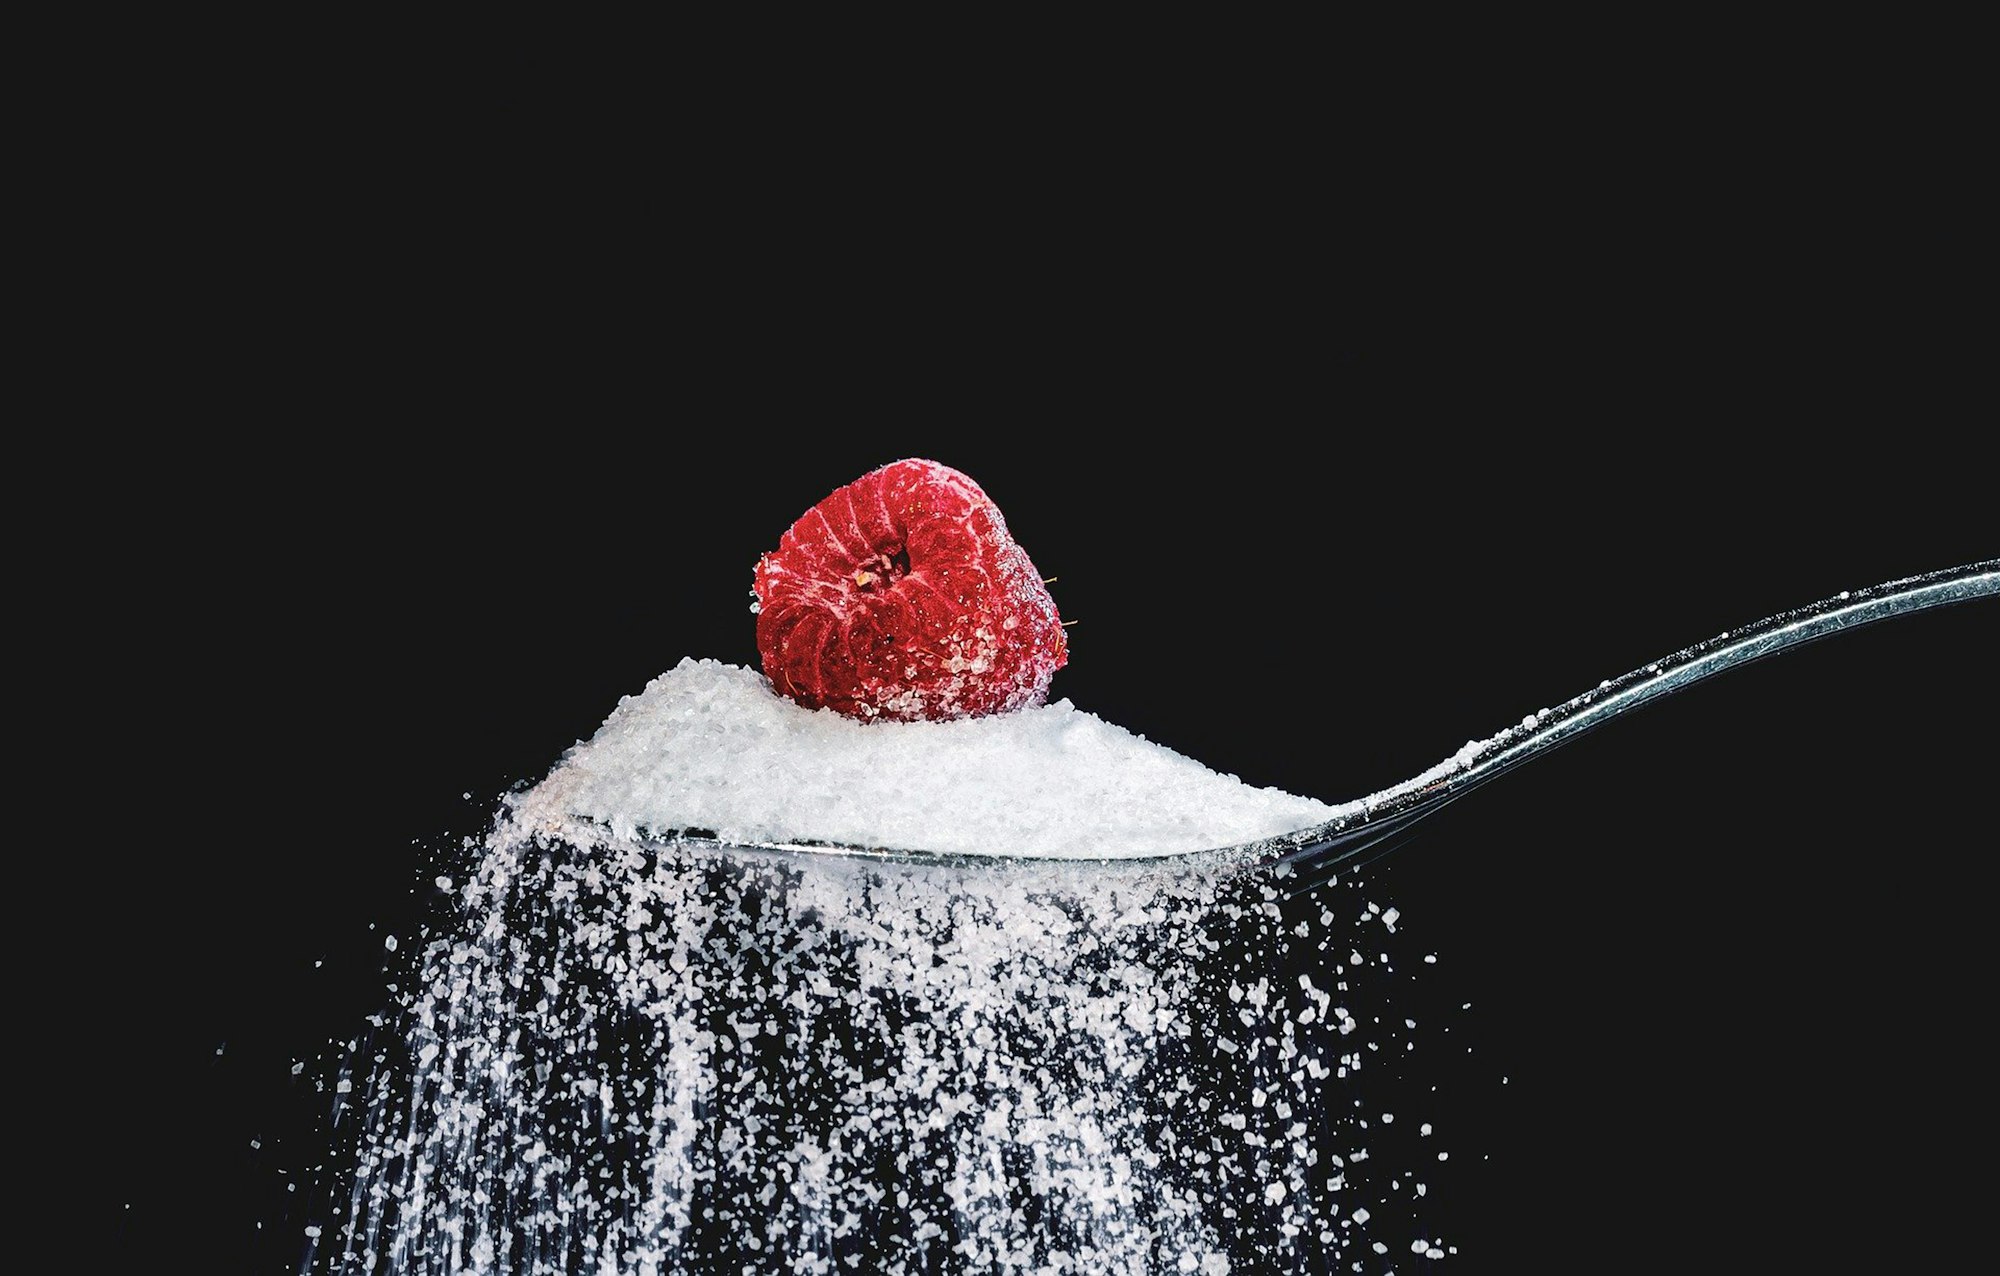 Artificial Sweetener: New Data Shows Potential Association with Heart Attack and Stroke